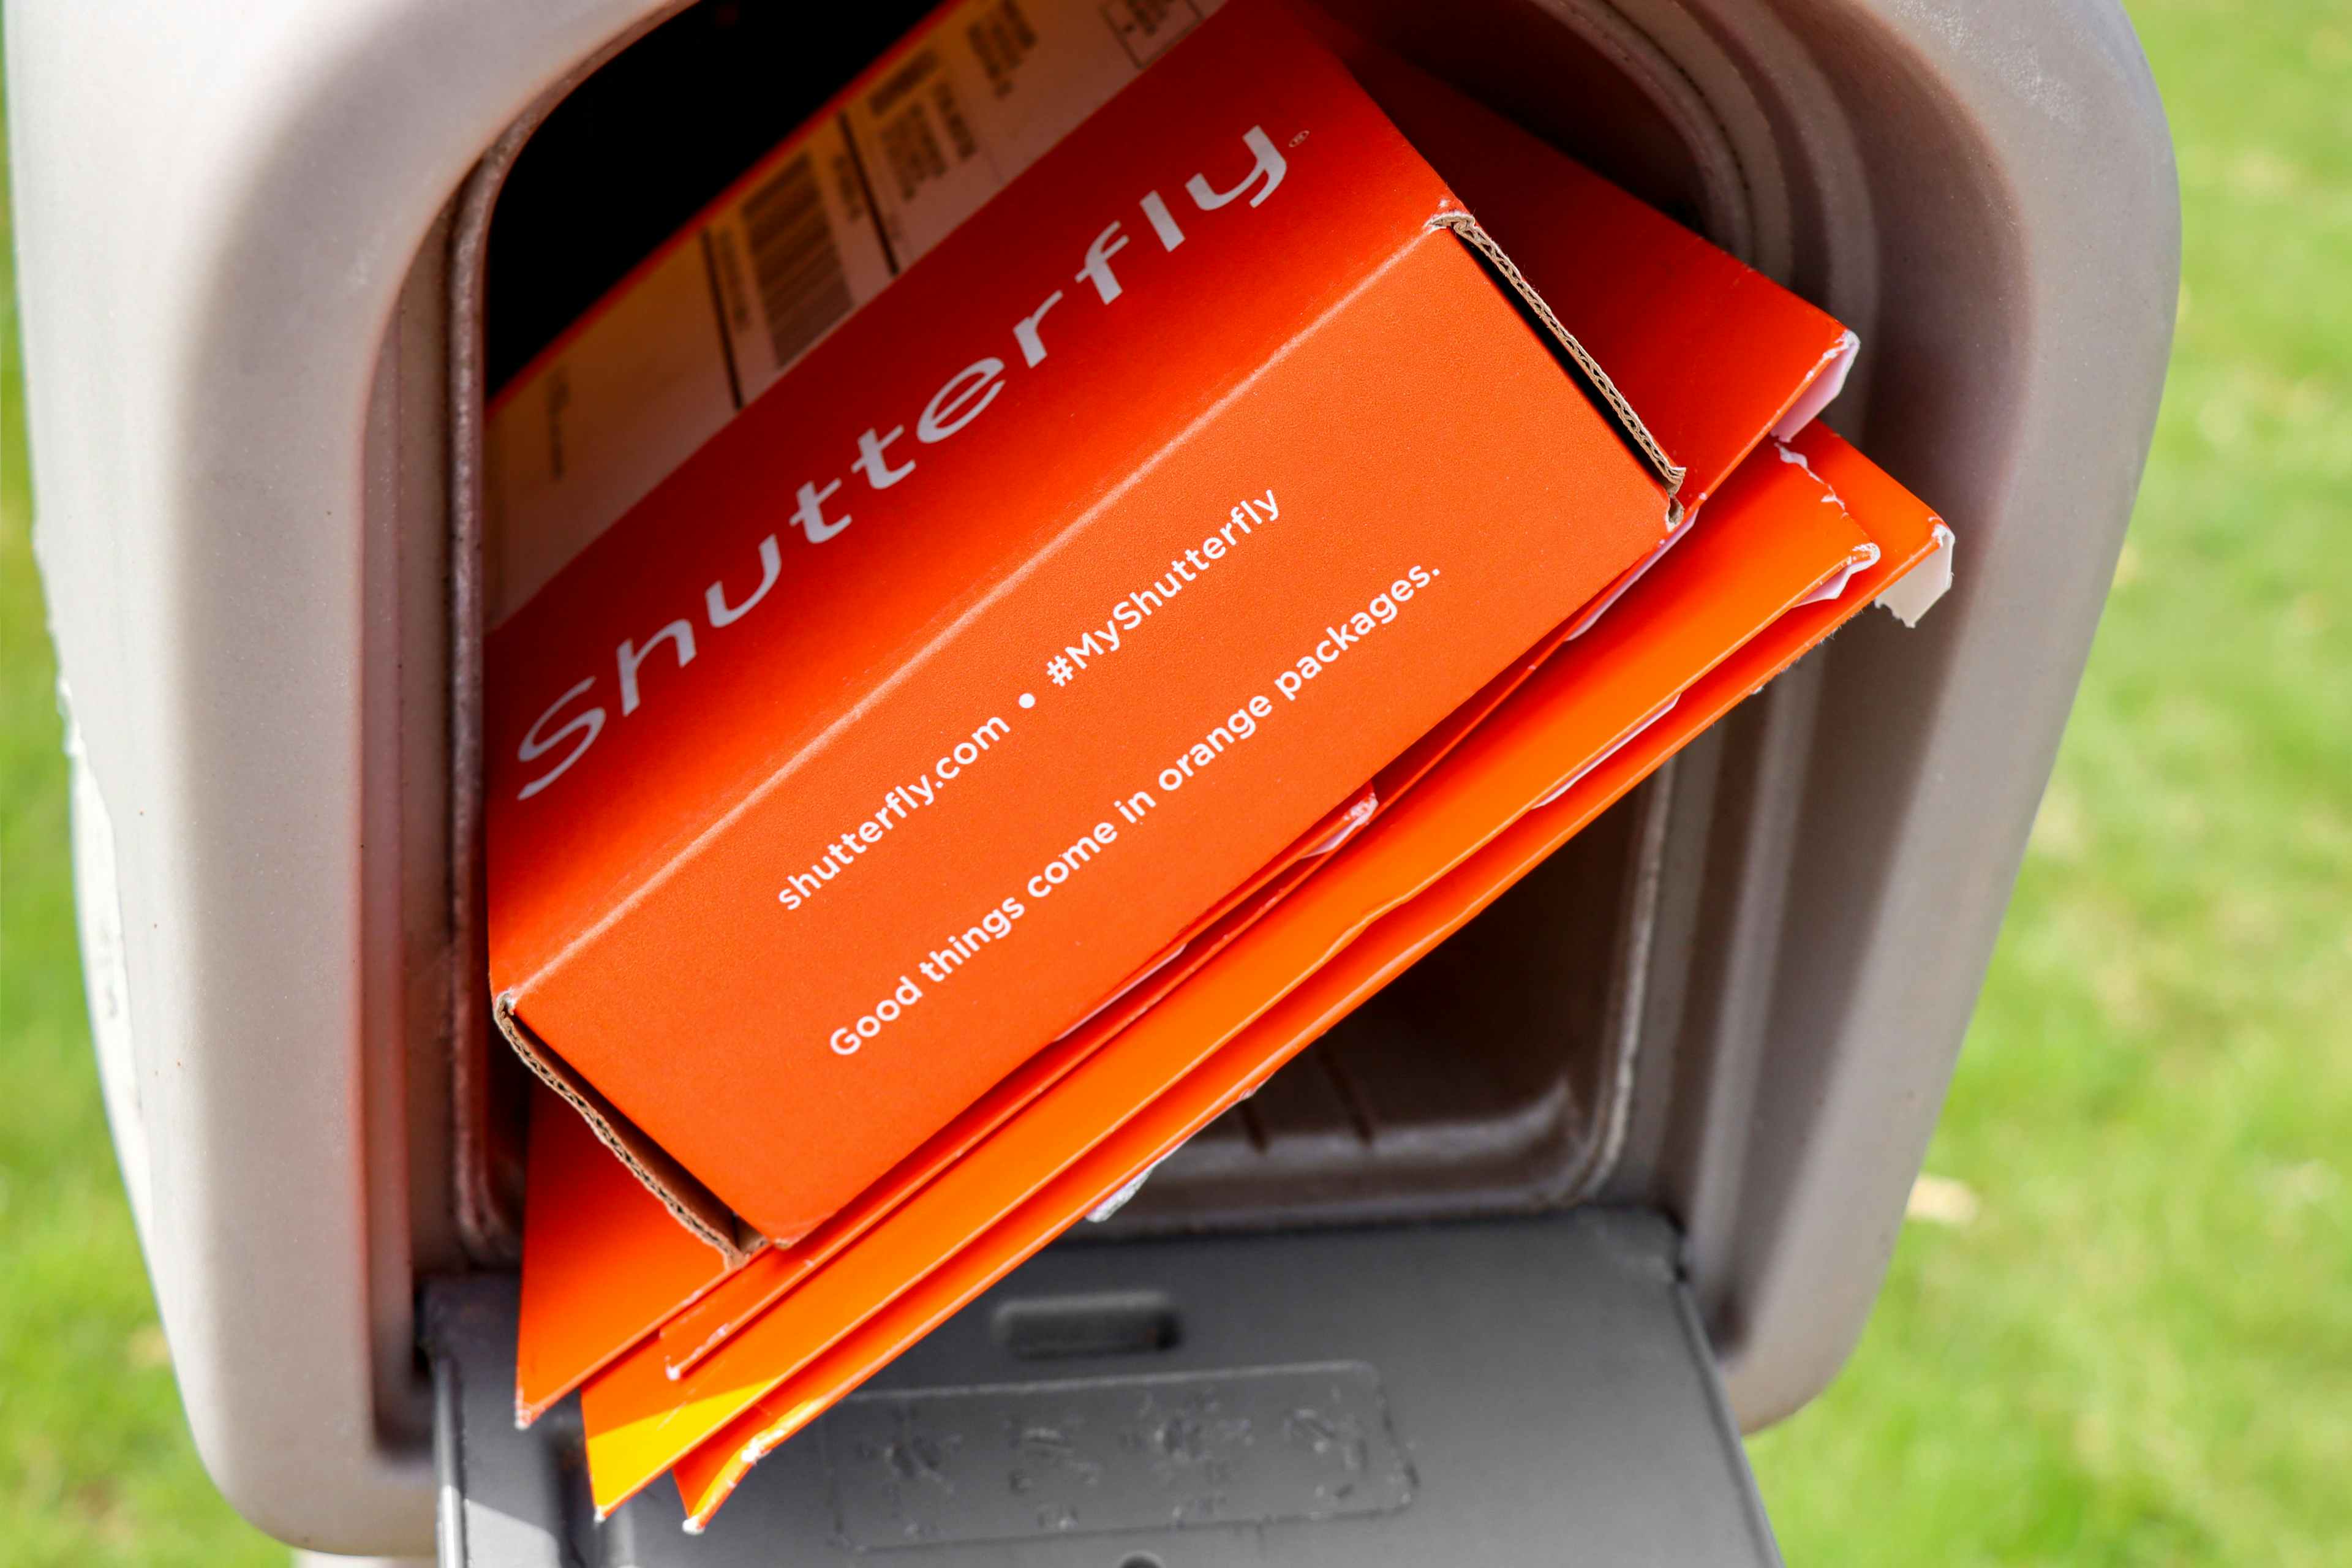 shutterfly-photo-order-mailbox-kcl